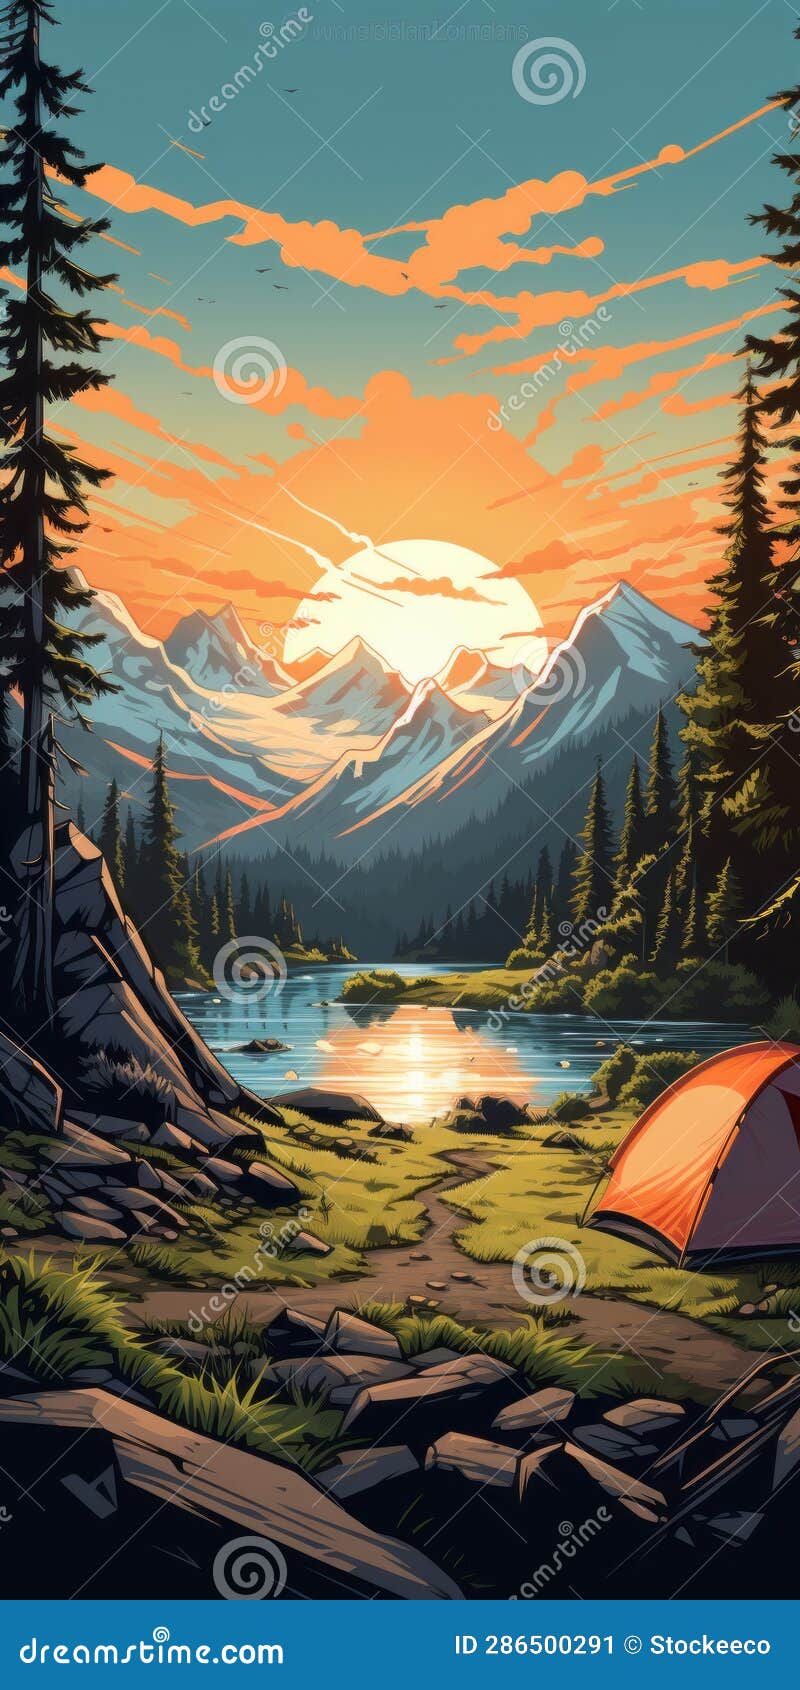 retrovirus camping poster: scenic view of tent campsite in the mountains